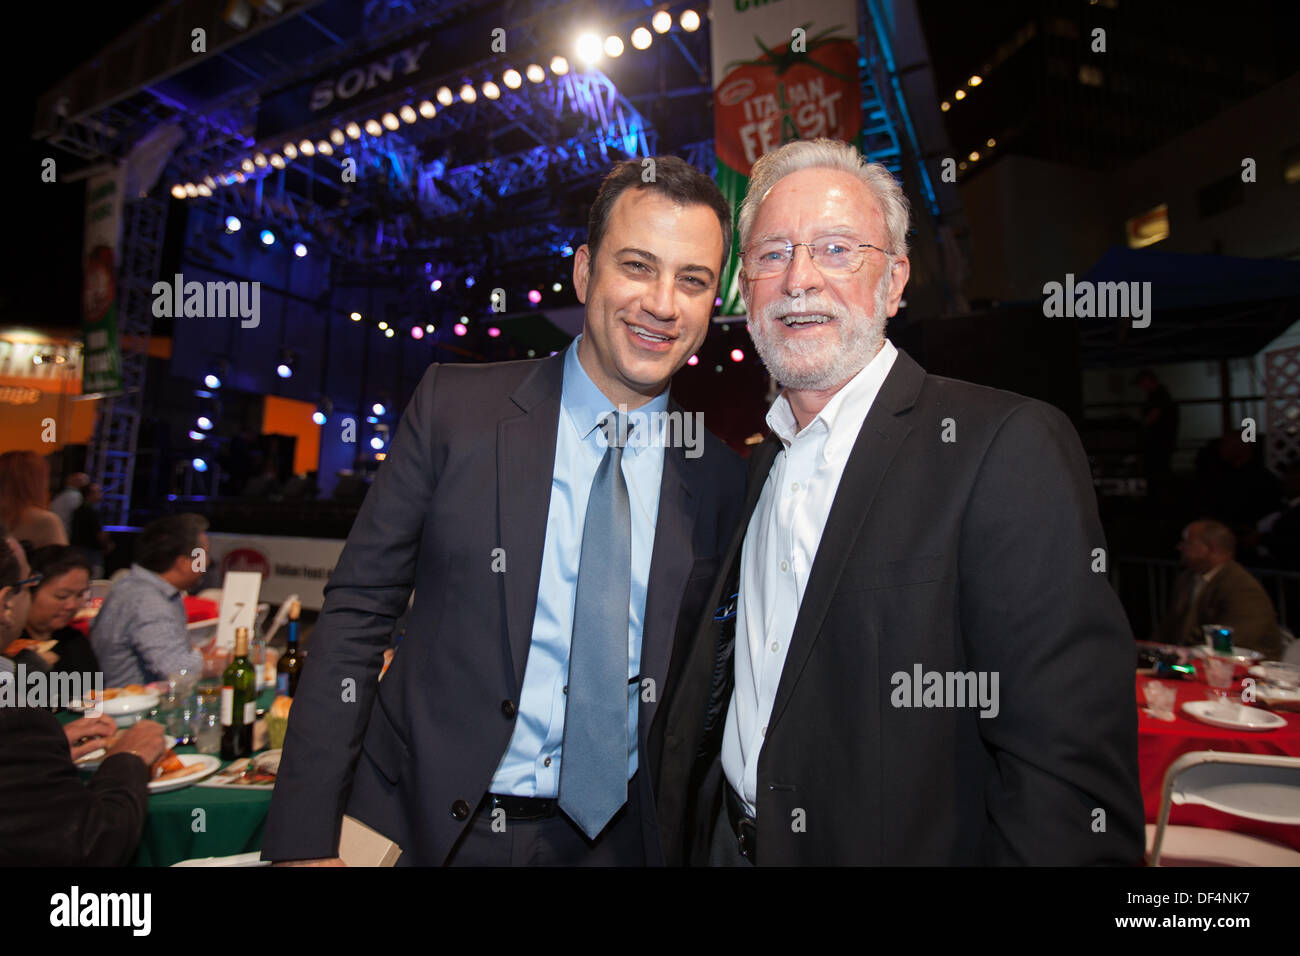 LA, CA, USA. 26th Sept, 2013. Late night talk show host Jimmy Kimmel (Jimmy Kimmel Live!) and his father Jim Kimmel at the Prima Notte Gala at the Feast of San Gennaro Italian Festival in Los Angeles, CA, USA on September 26, 2013. Jimmy Kimmel was one of the founders of the Feast of San Gennaro LA, and the entertainment takes place on the outdoor stage from his TV show, behind the Disney Entertainment Center on Hollywood Boulevard where Jimmy Kimmel Live! is taped. © Kayte Deioma/Alamy Live News Stock Photo